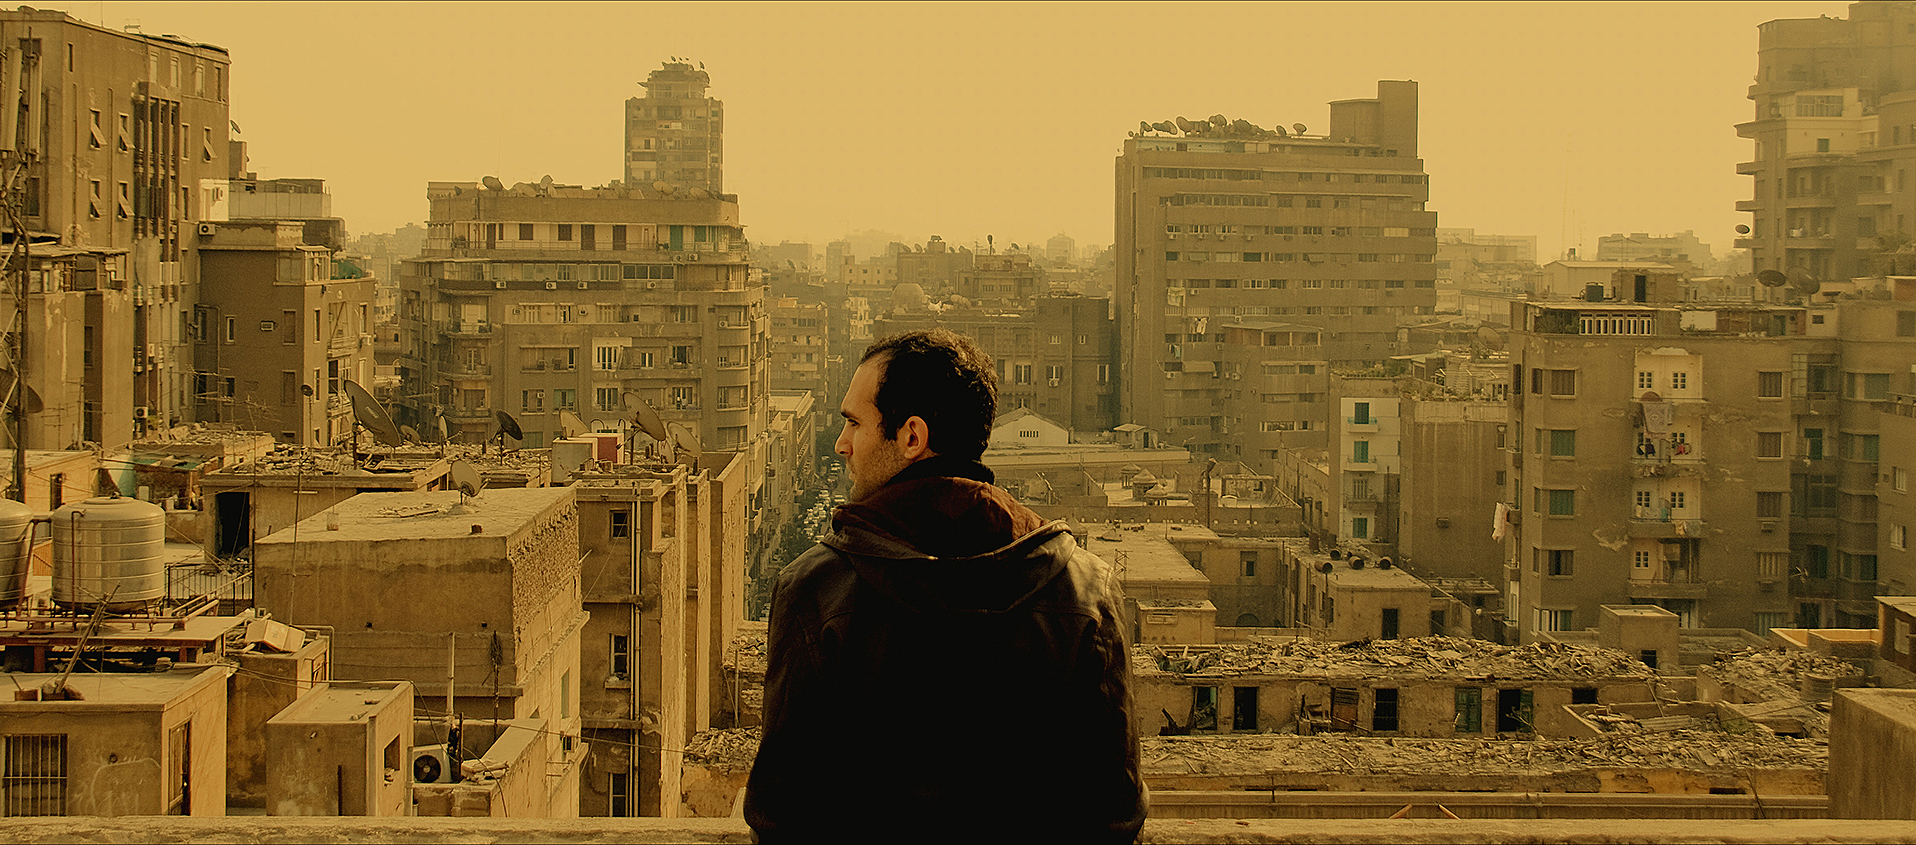 A man seen from behind, looking across a yellow-tinted cityscape